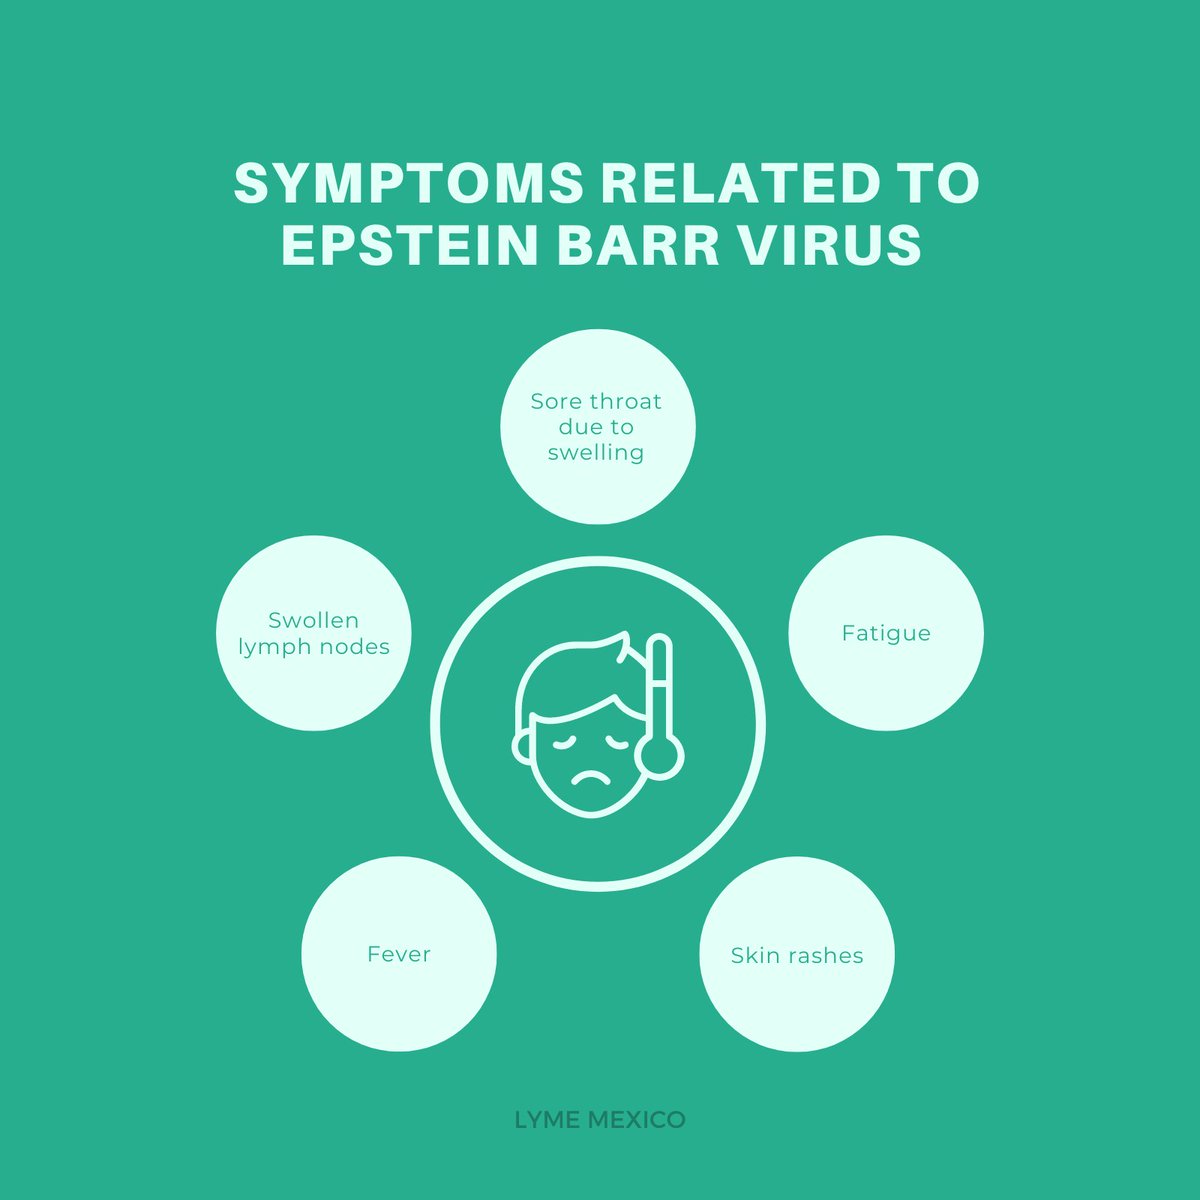 EBV affects the immune system by attaching to white blood cells, preventing them from fighting infection. 

New and developing #EpsteinBarr treatments for #autoimmunedisorders exist and can be accessed by working with an infectious disease specialist.

lymemexico.com/epstein-barr-v…